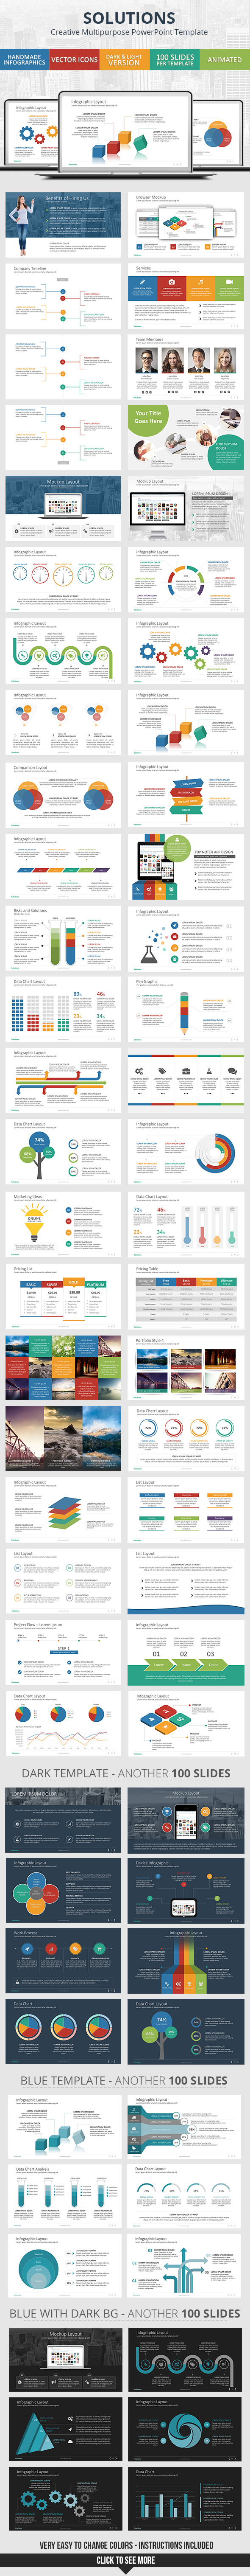 Solutions - PowerPoint Presentation Template